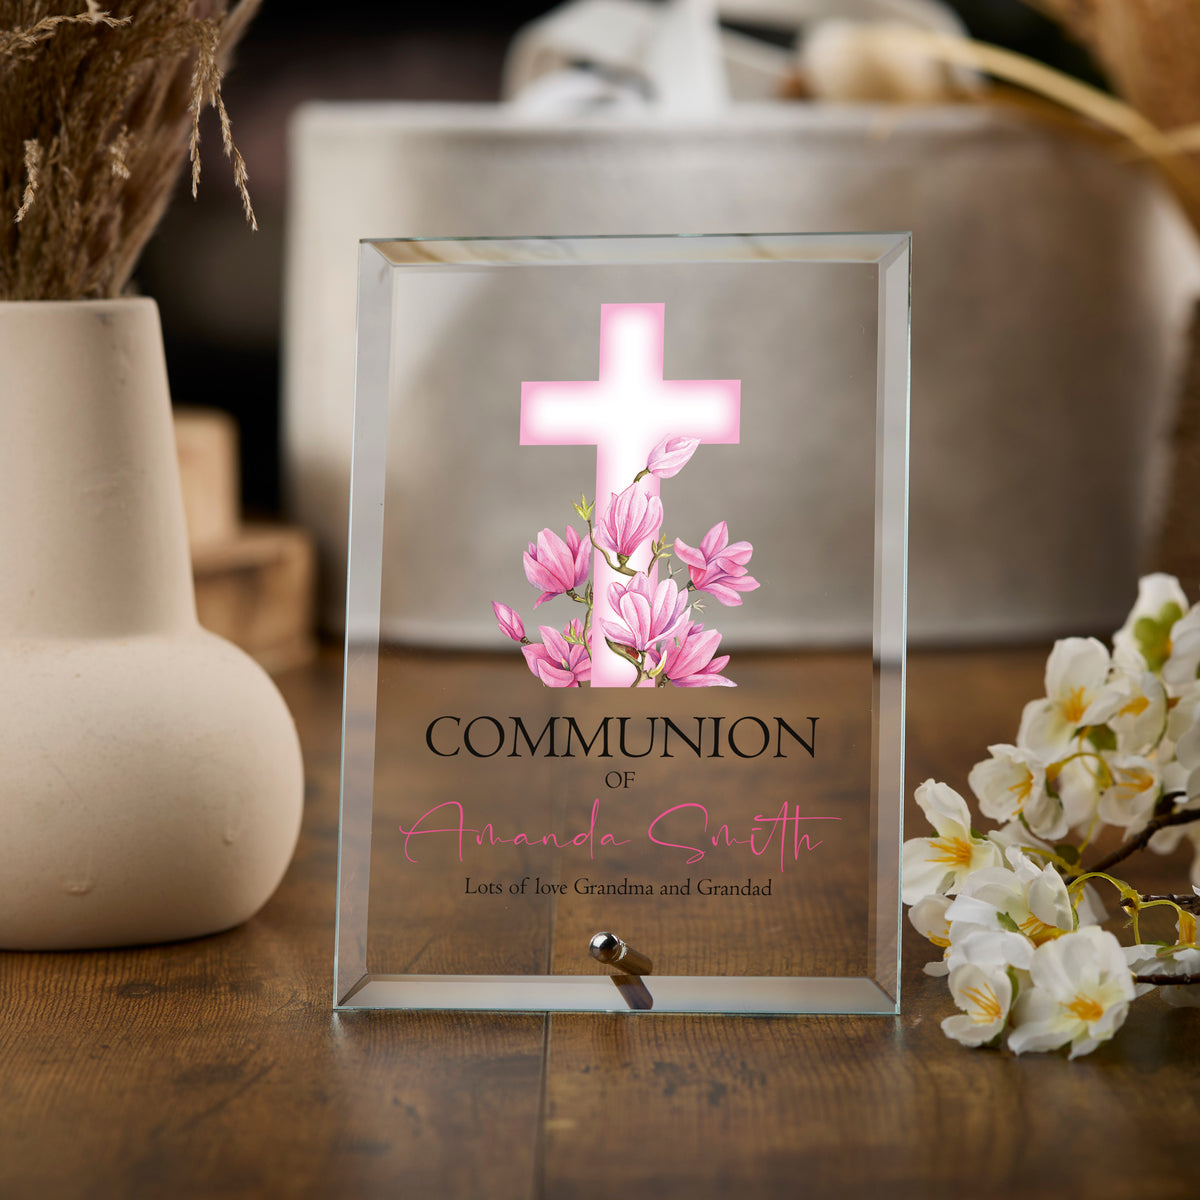 Personalised Communion Keepsake Plaque Gift With Pink Floral Cross